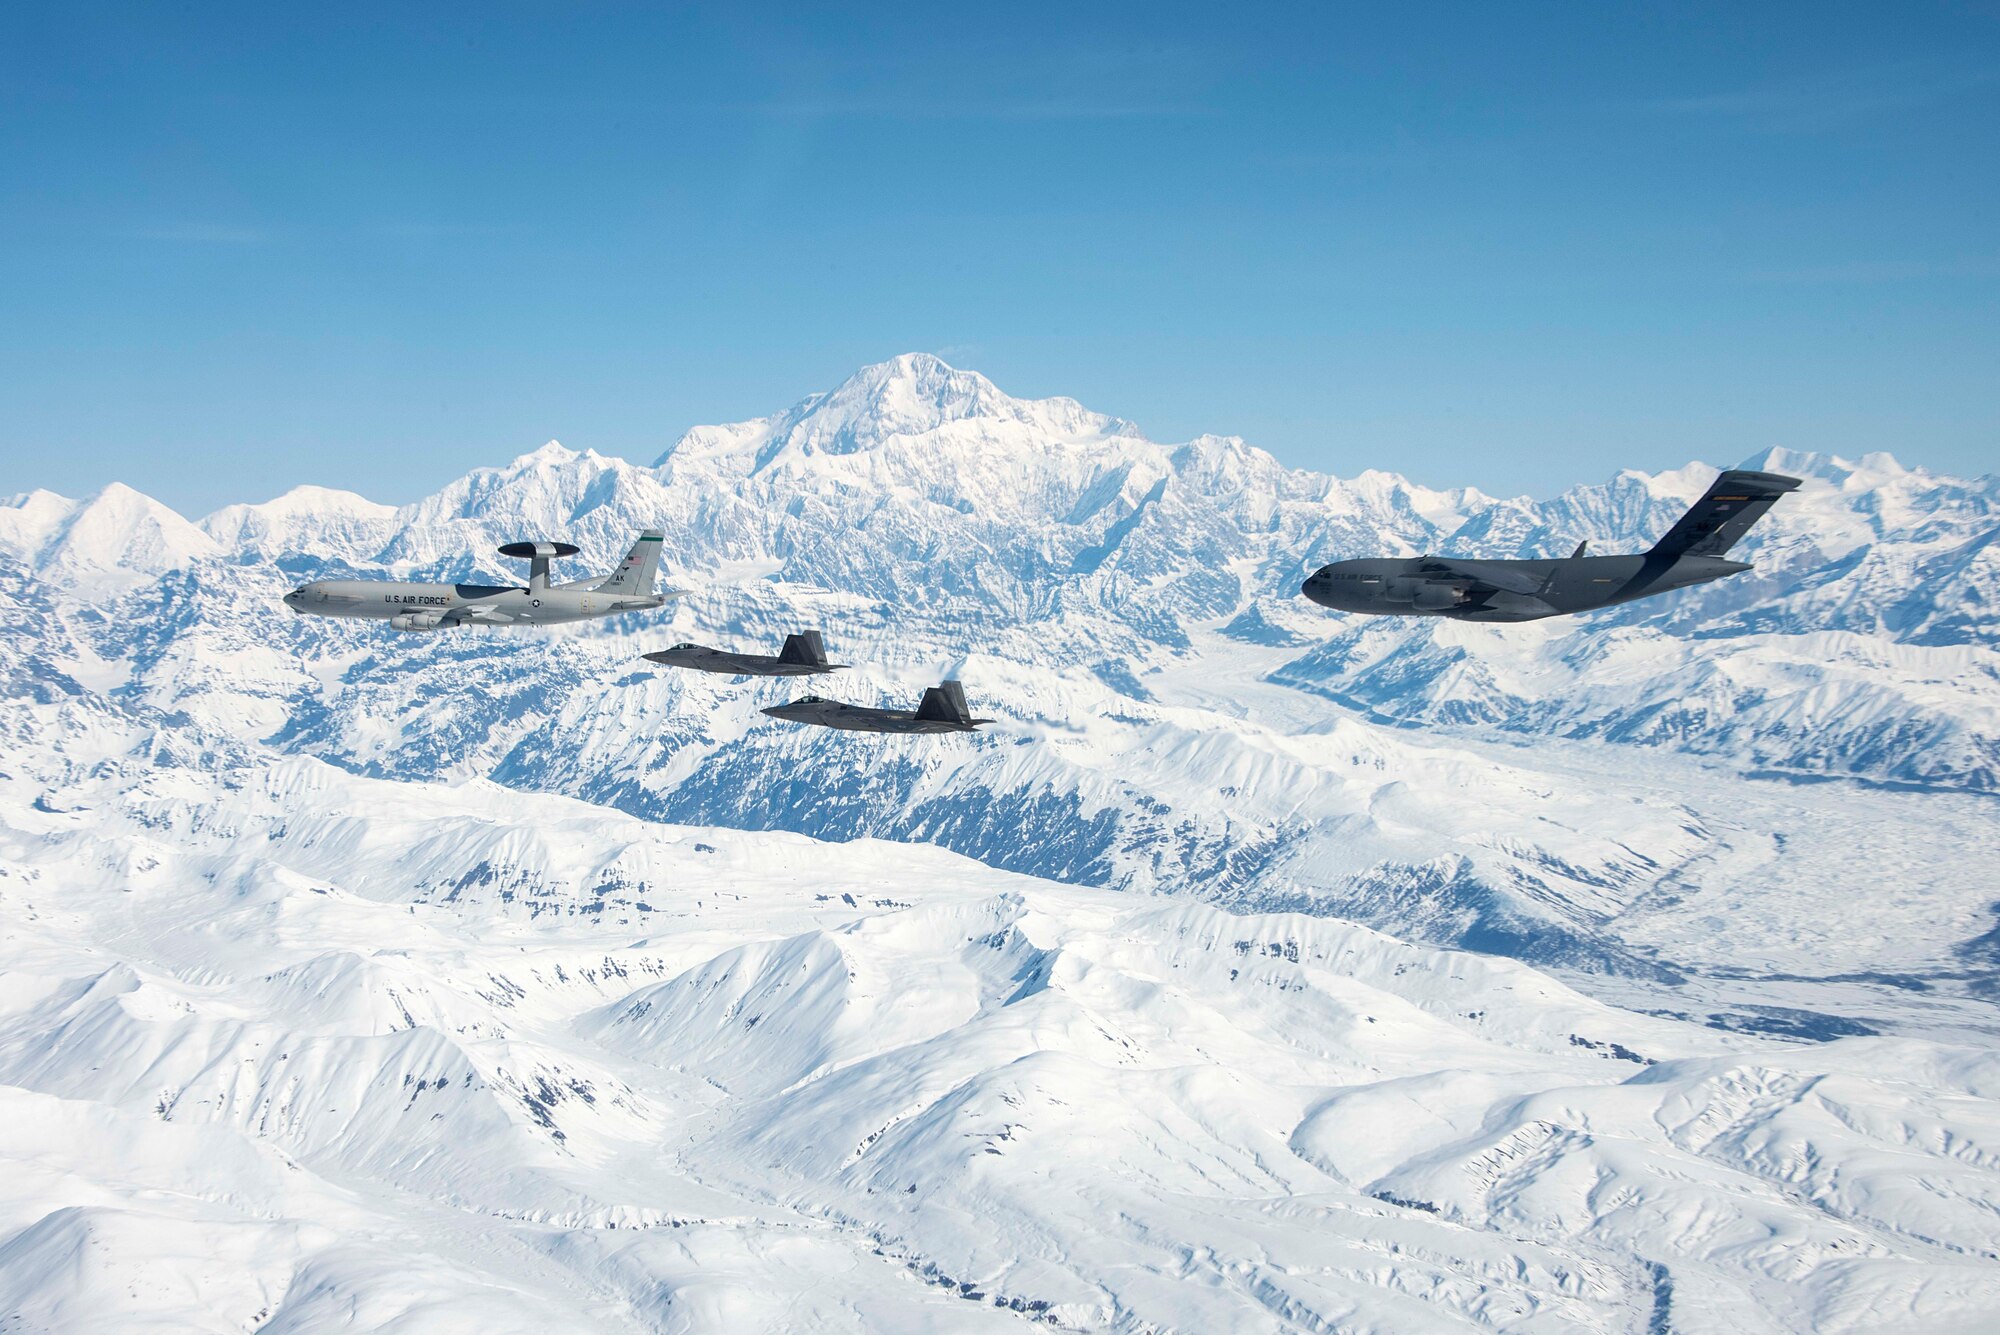 An E-3 Sentry, two F-22 Raptors and a C-17 Globetrotter assigned to Joint Base Elmendorf-Richardson fly over Alaska May 5, 2020.